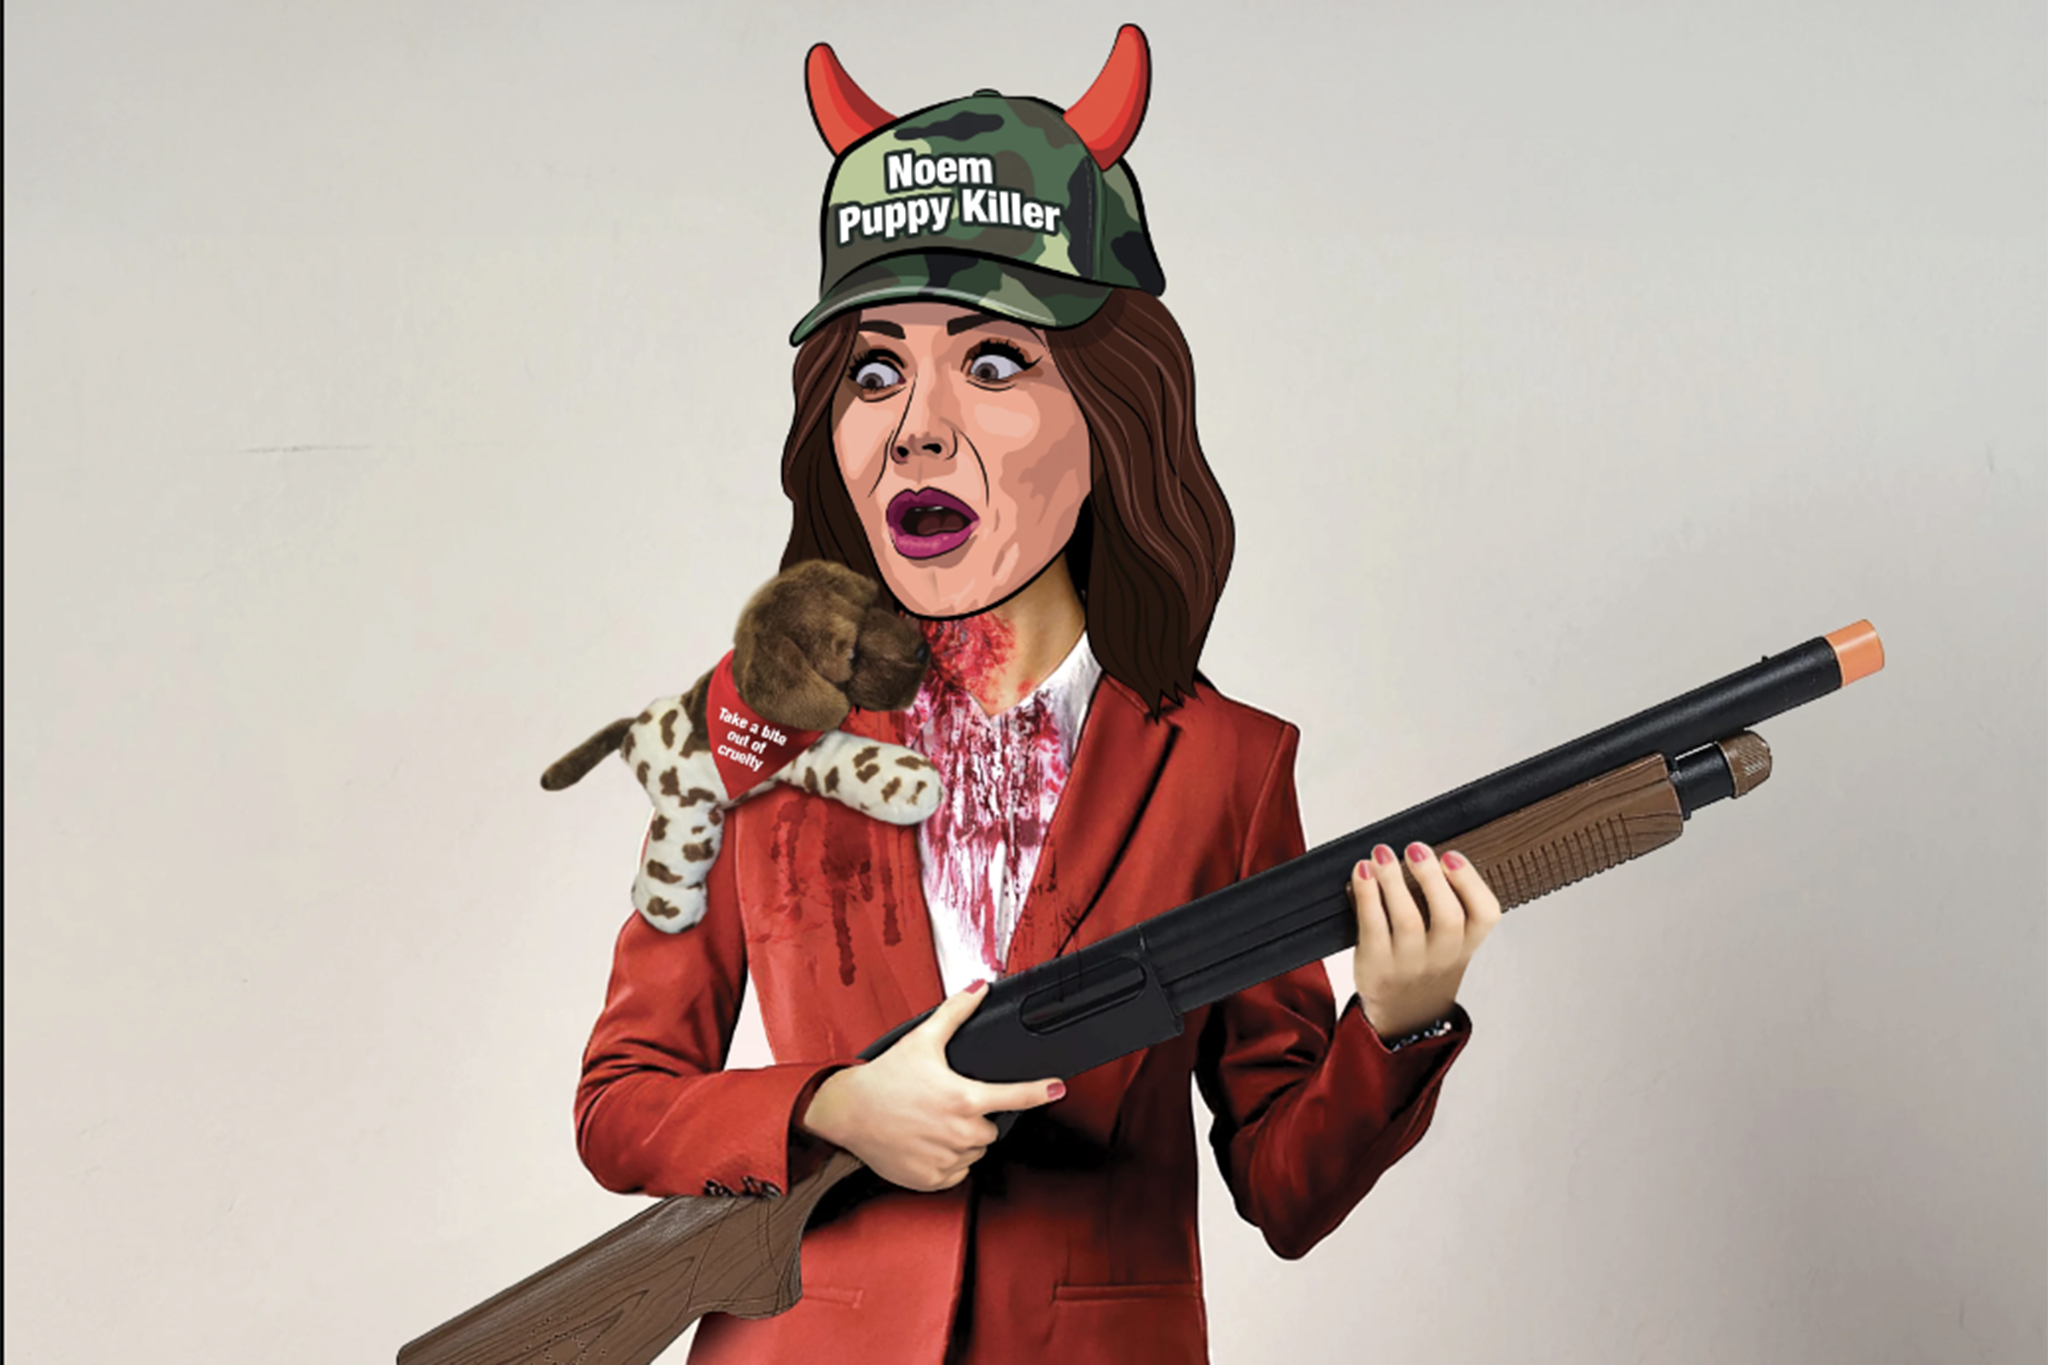 The costume features a mask of Ms Noem’s face with devil horns and a camo hat imprinted with ‘Noem: Puppy Killer,’ and a fake gun